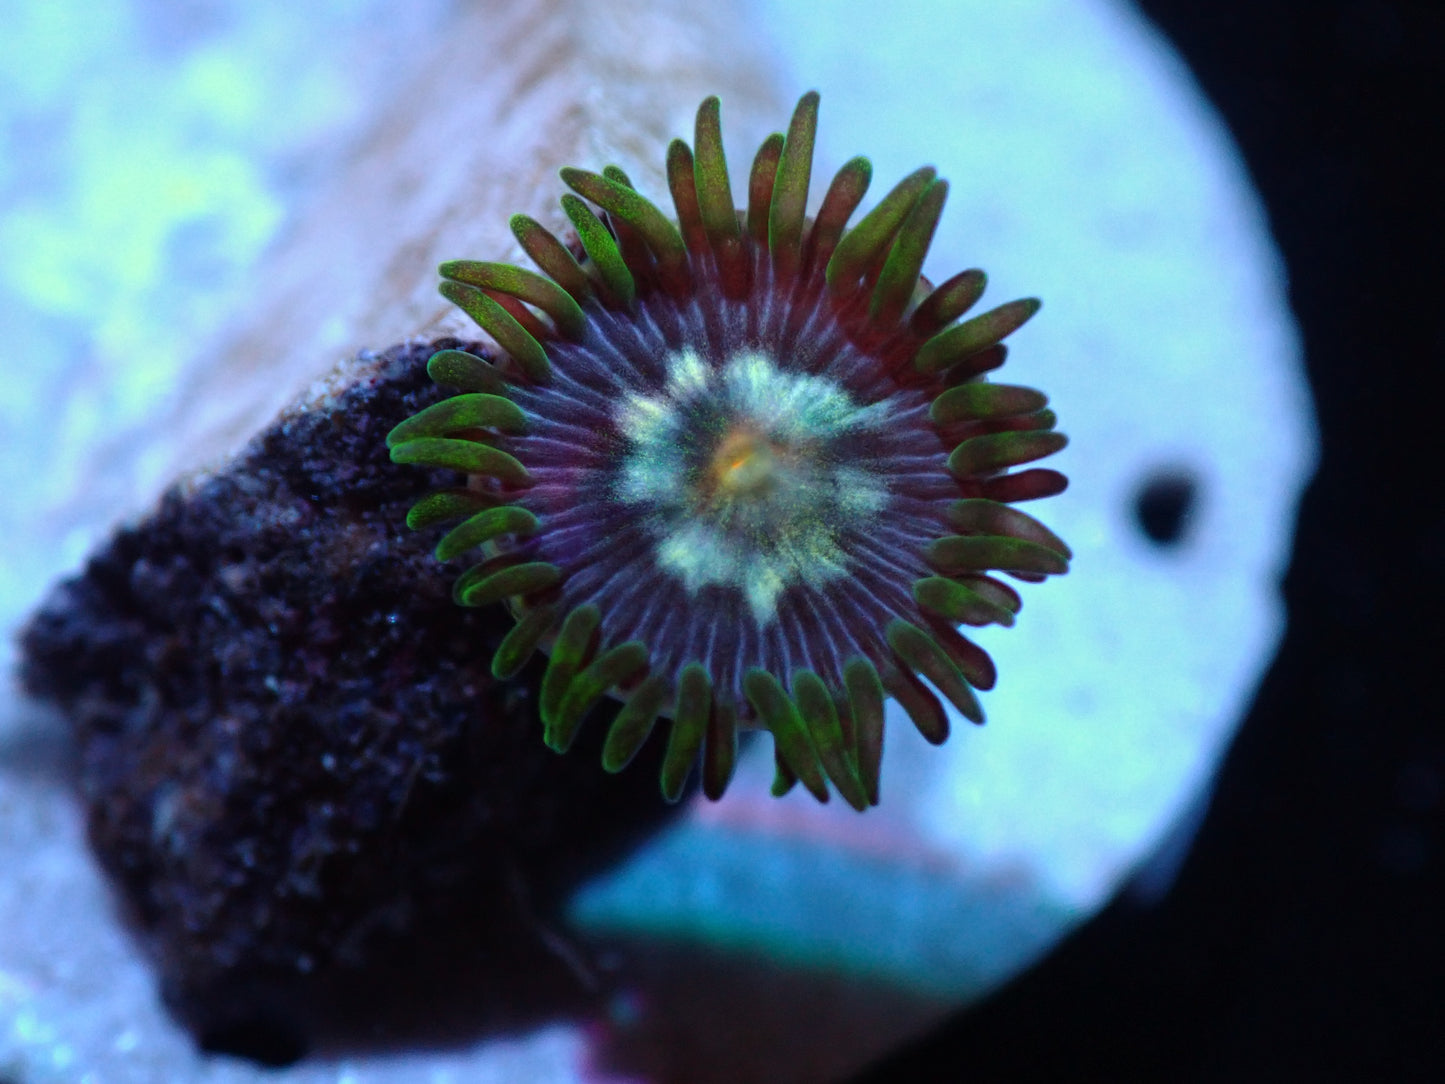 Daisy Cutter Zoa Auctions 4/17 ended